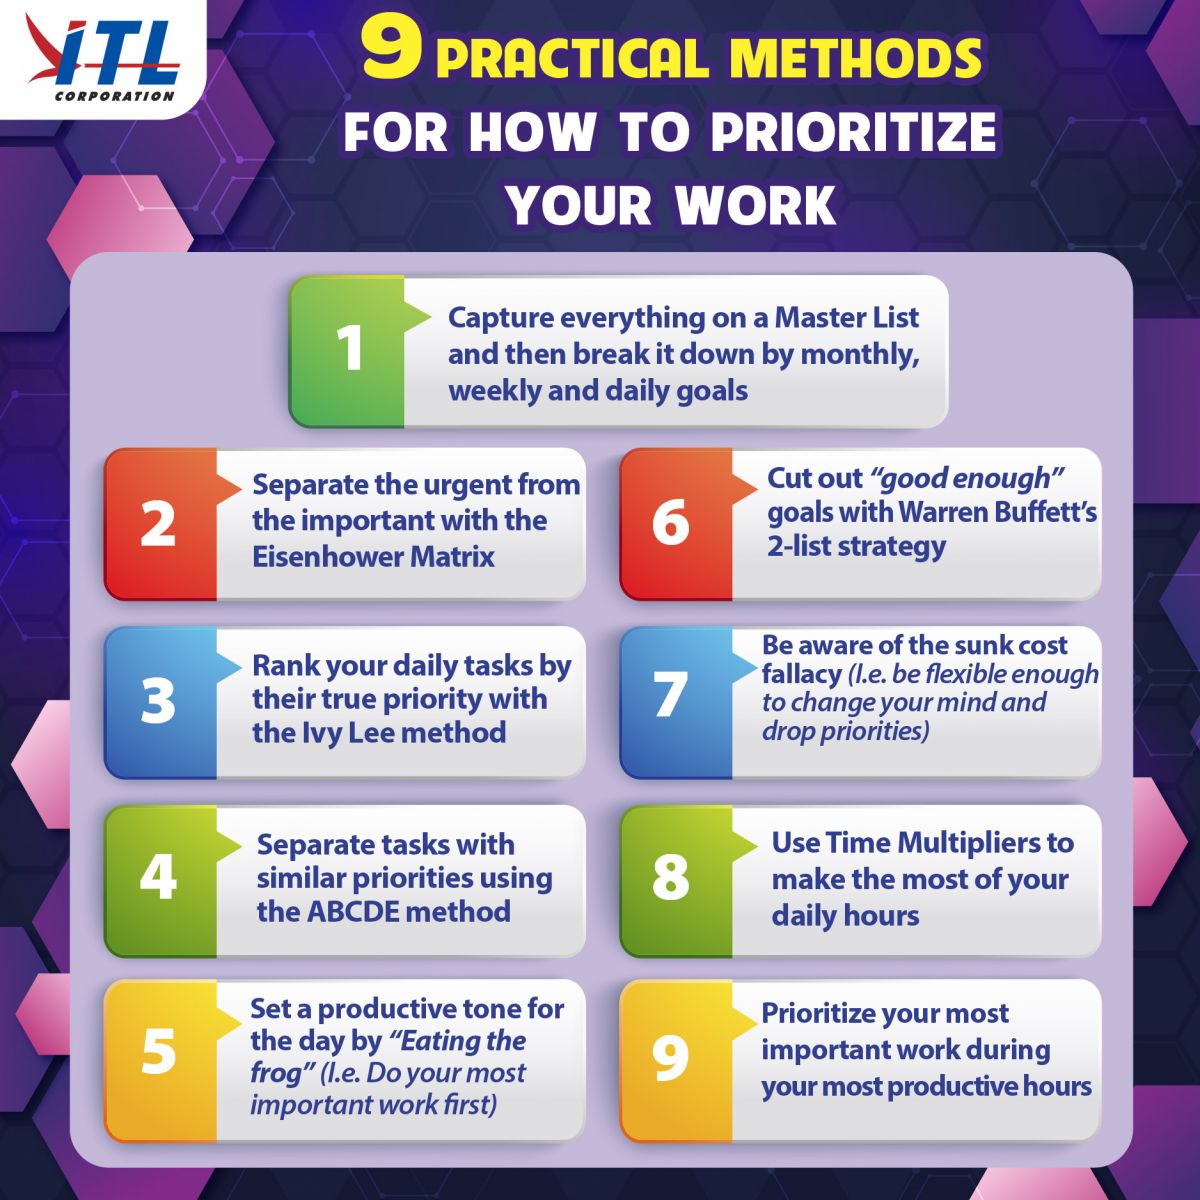 Itl Corporation 9 Practical Methods For How To Prioritize Your Work